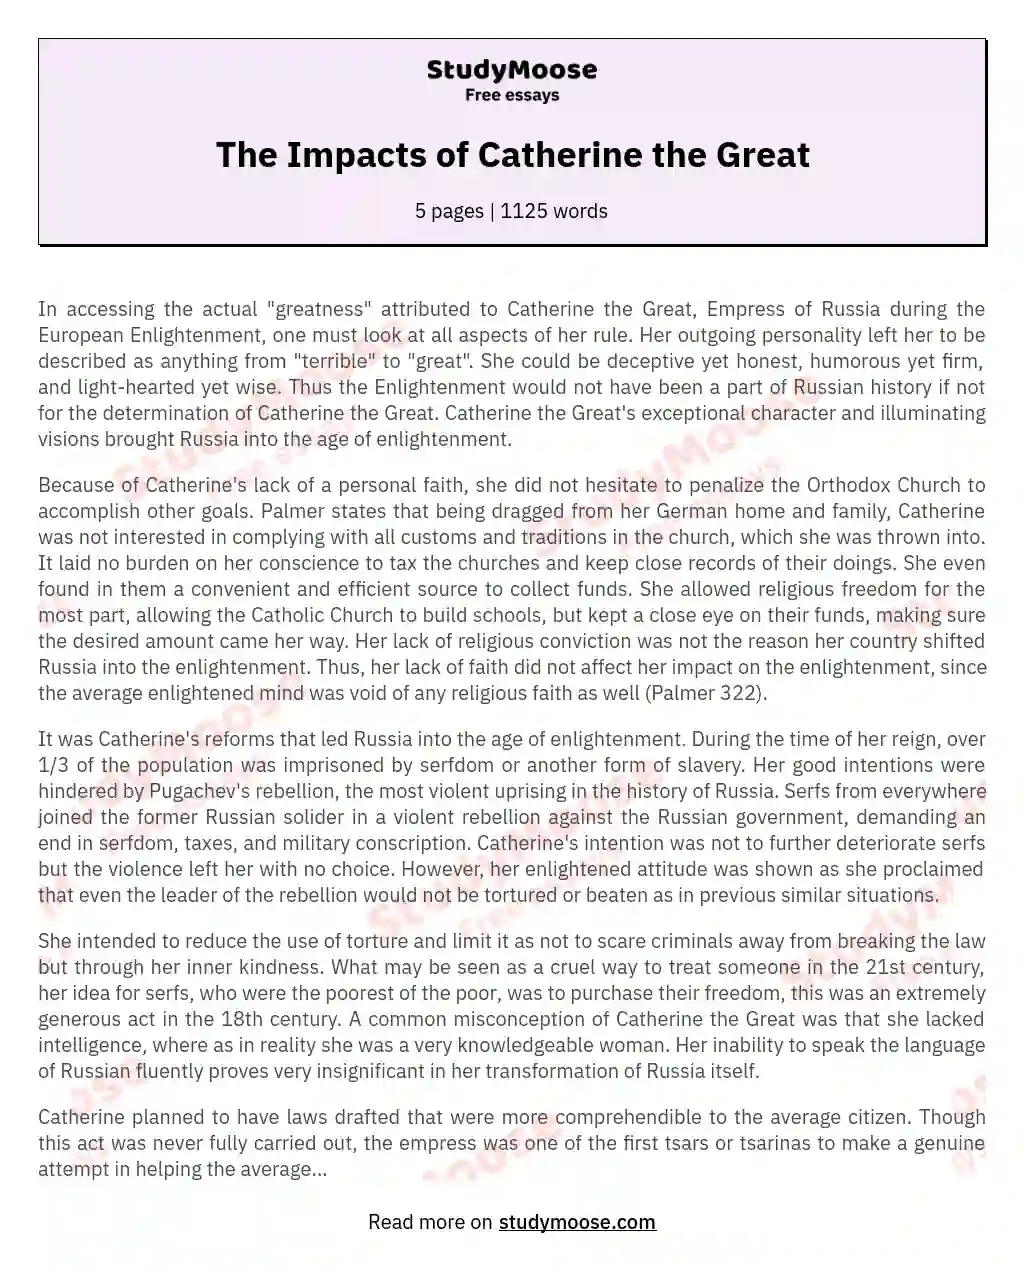 The Impacts of Catherine the Great essay